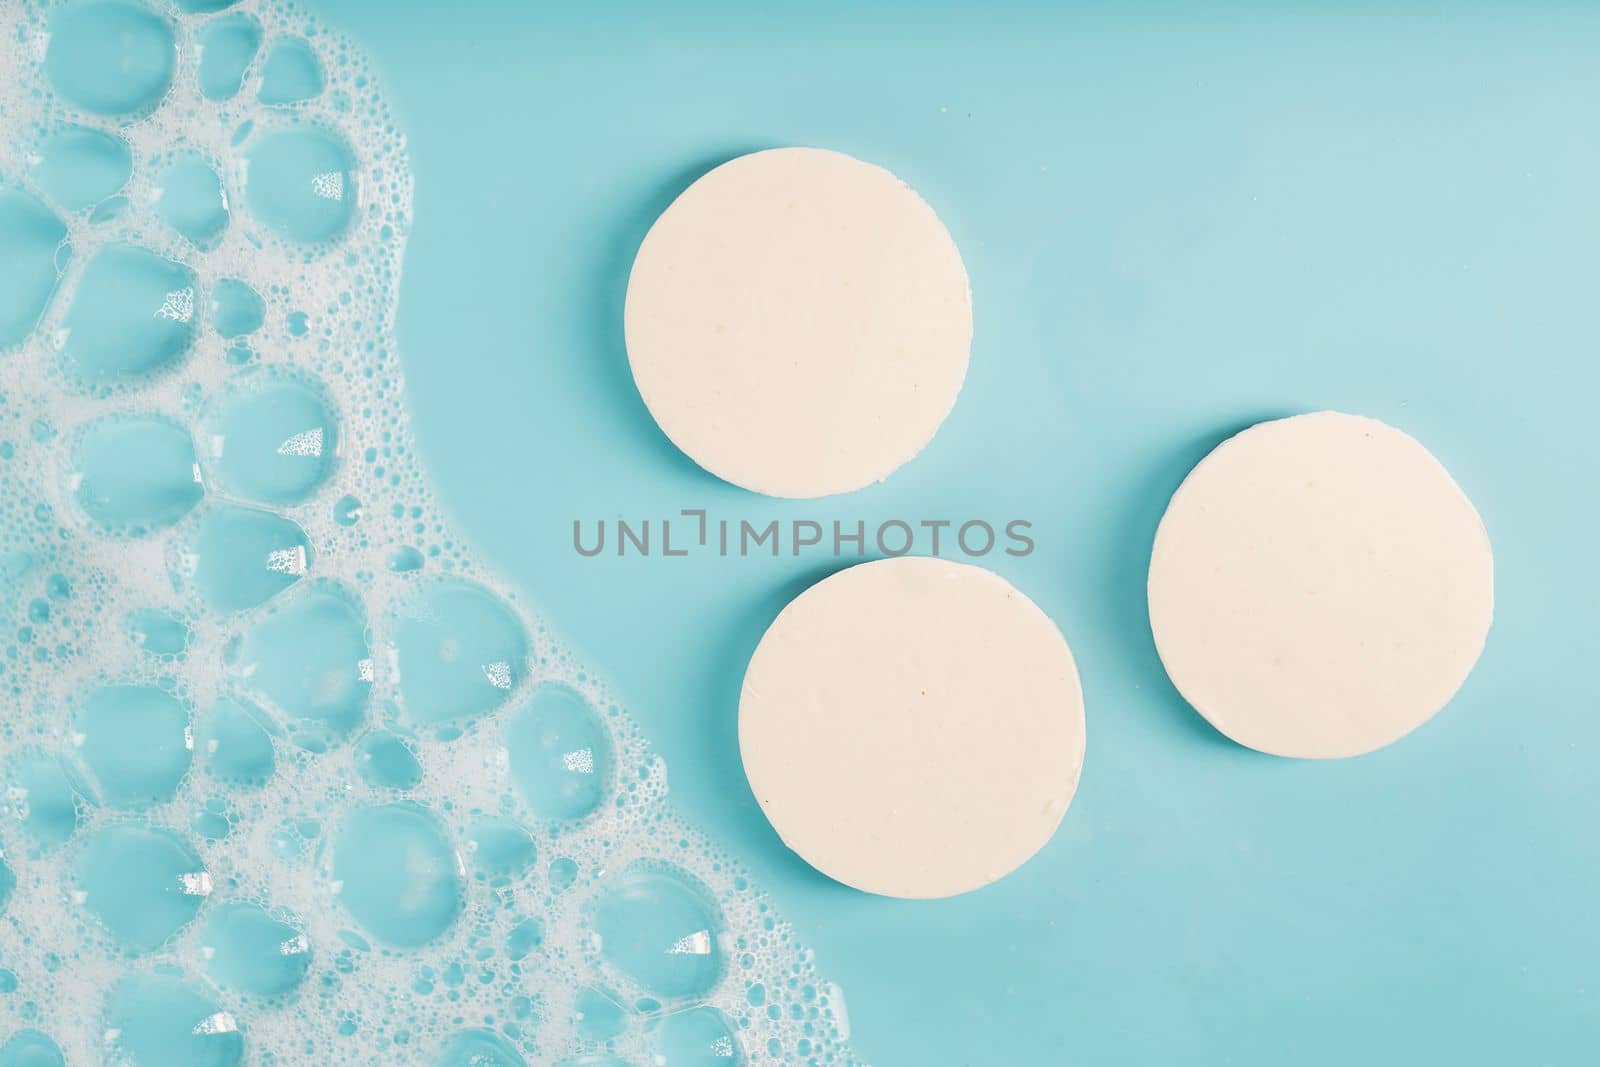 Three round pieces of white soap with foam on a blue background